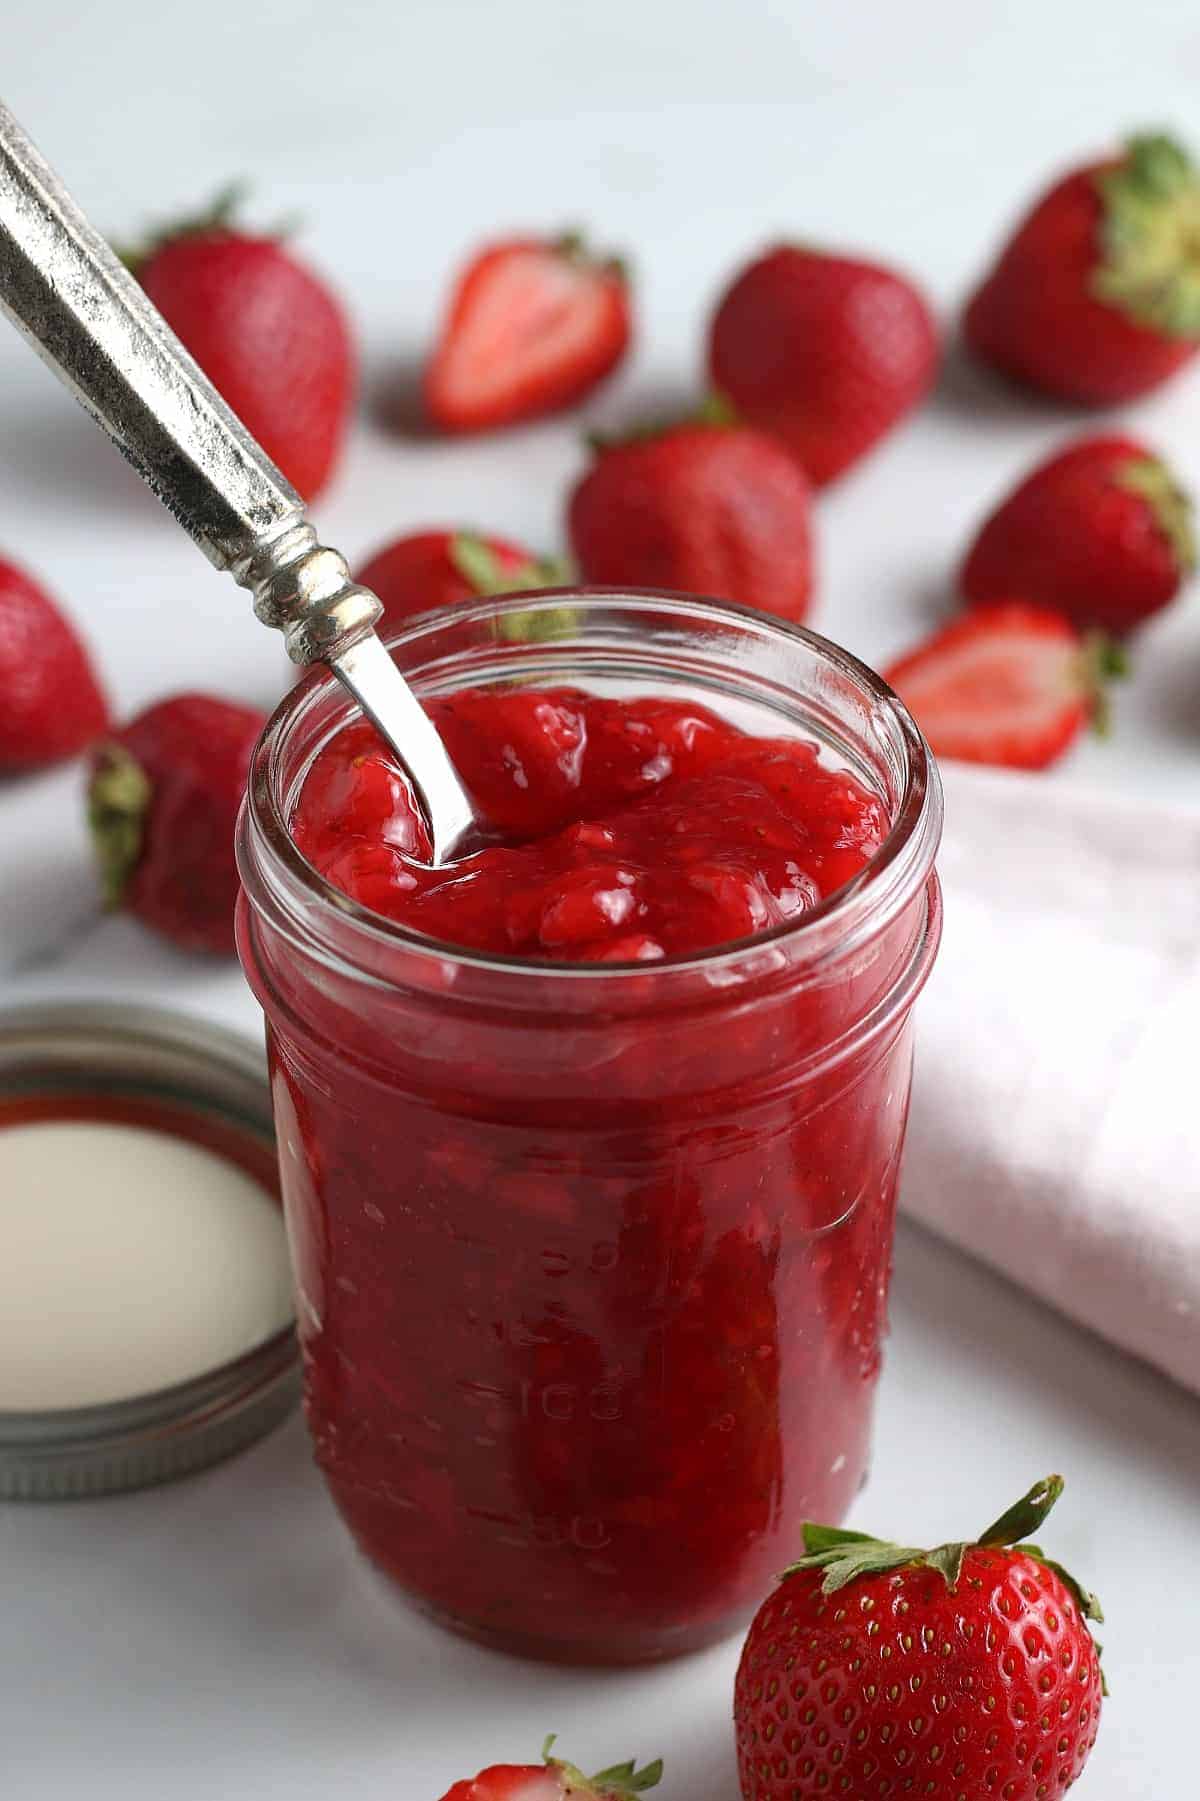 Strawberry sauce bring scooped out of a canning jar.